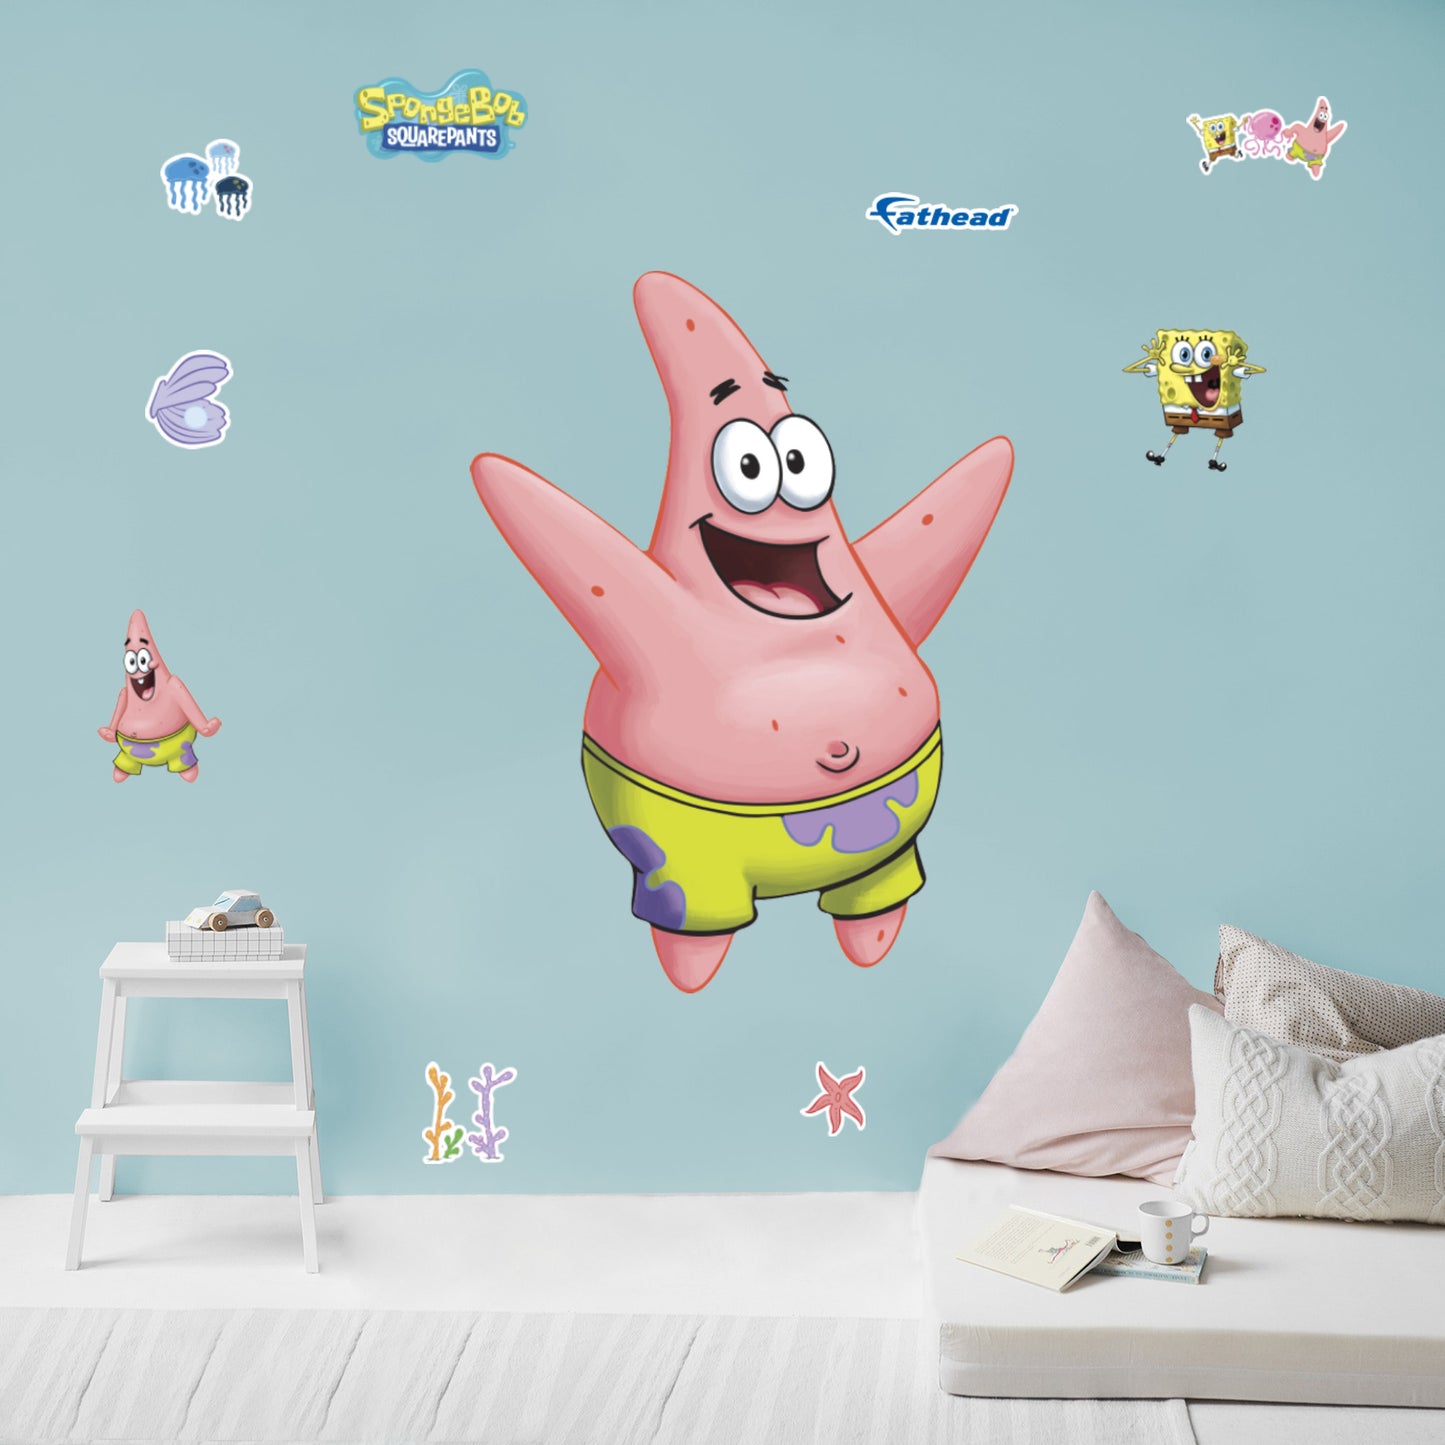 Life-Size Character +9 Decals (51.5"W x 68"H)